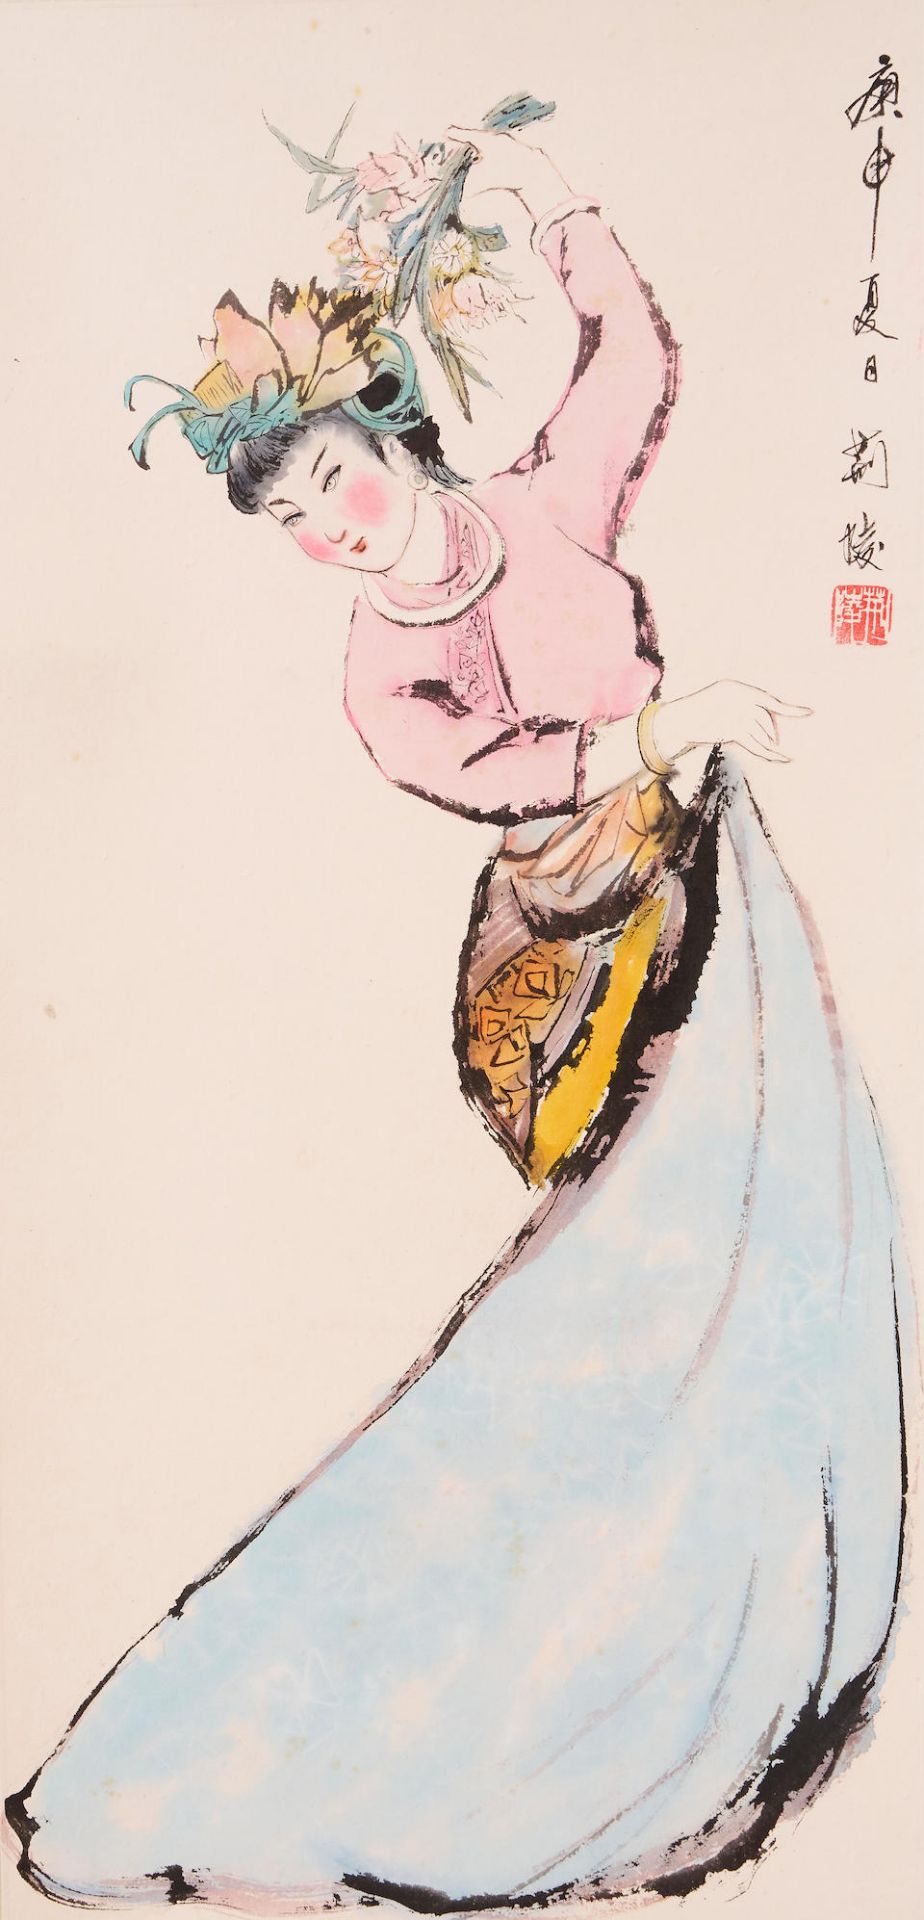 Huang Chishi (1915-1970), Lianguang, et al. Various subjects (7) - Image 5 of 8